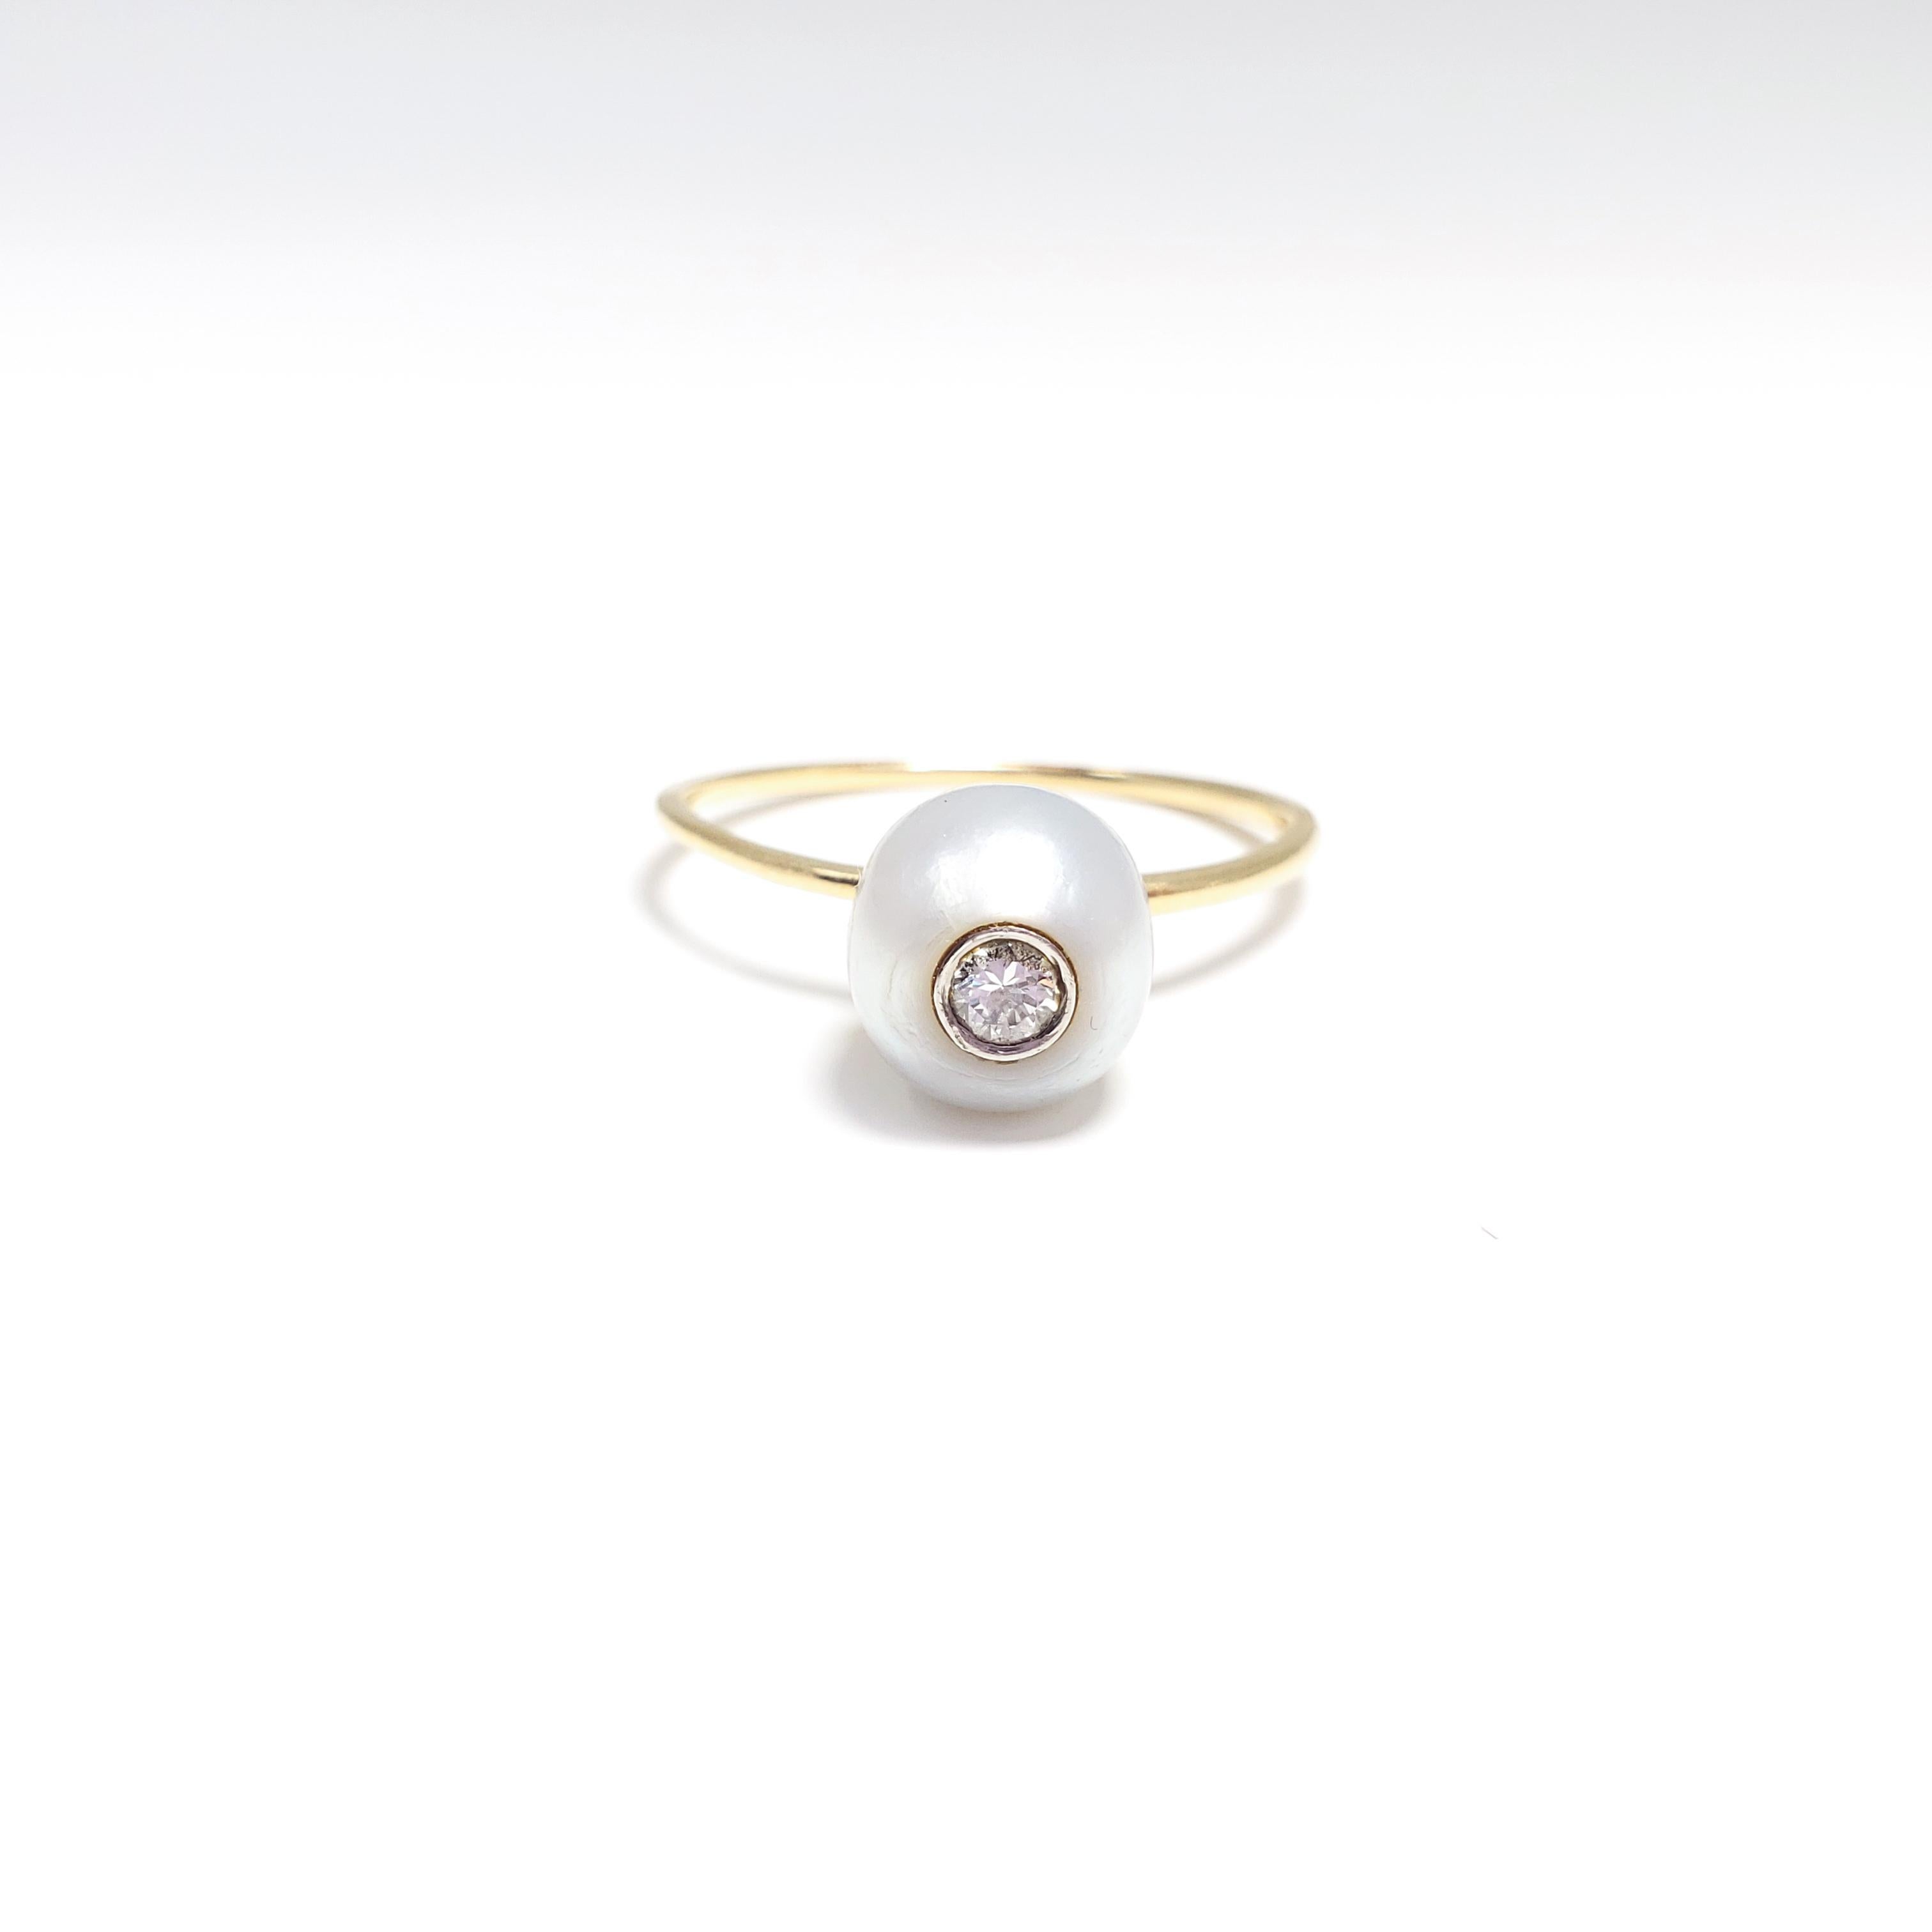 An elegant 14K gold ring featuring a single genuine Tahitian pearl, set with a 2.6 mm diameter diamond - excellent clarity.

US Size 9
Pearl diameter: 8.24 mm